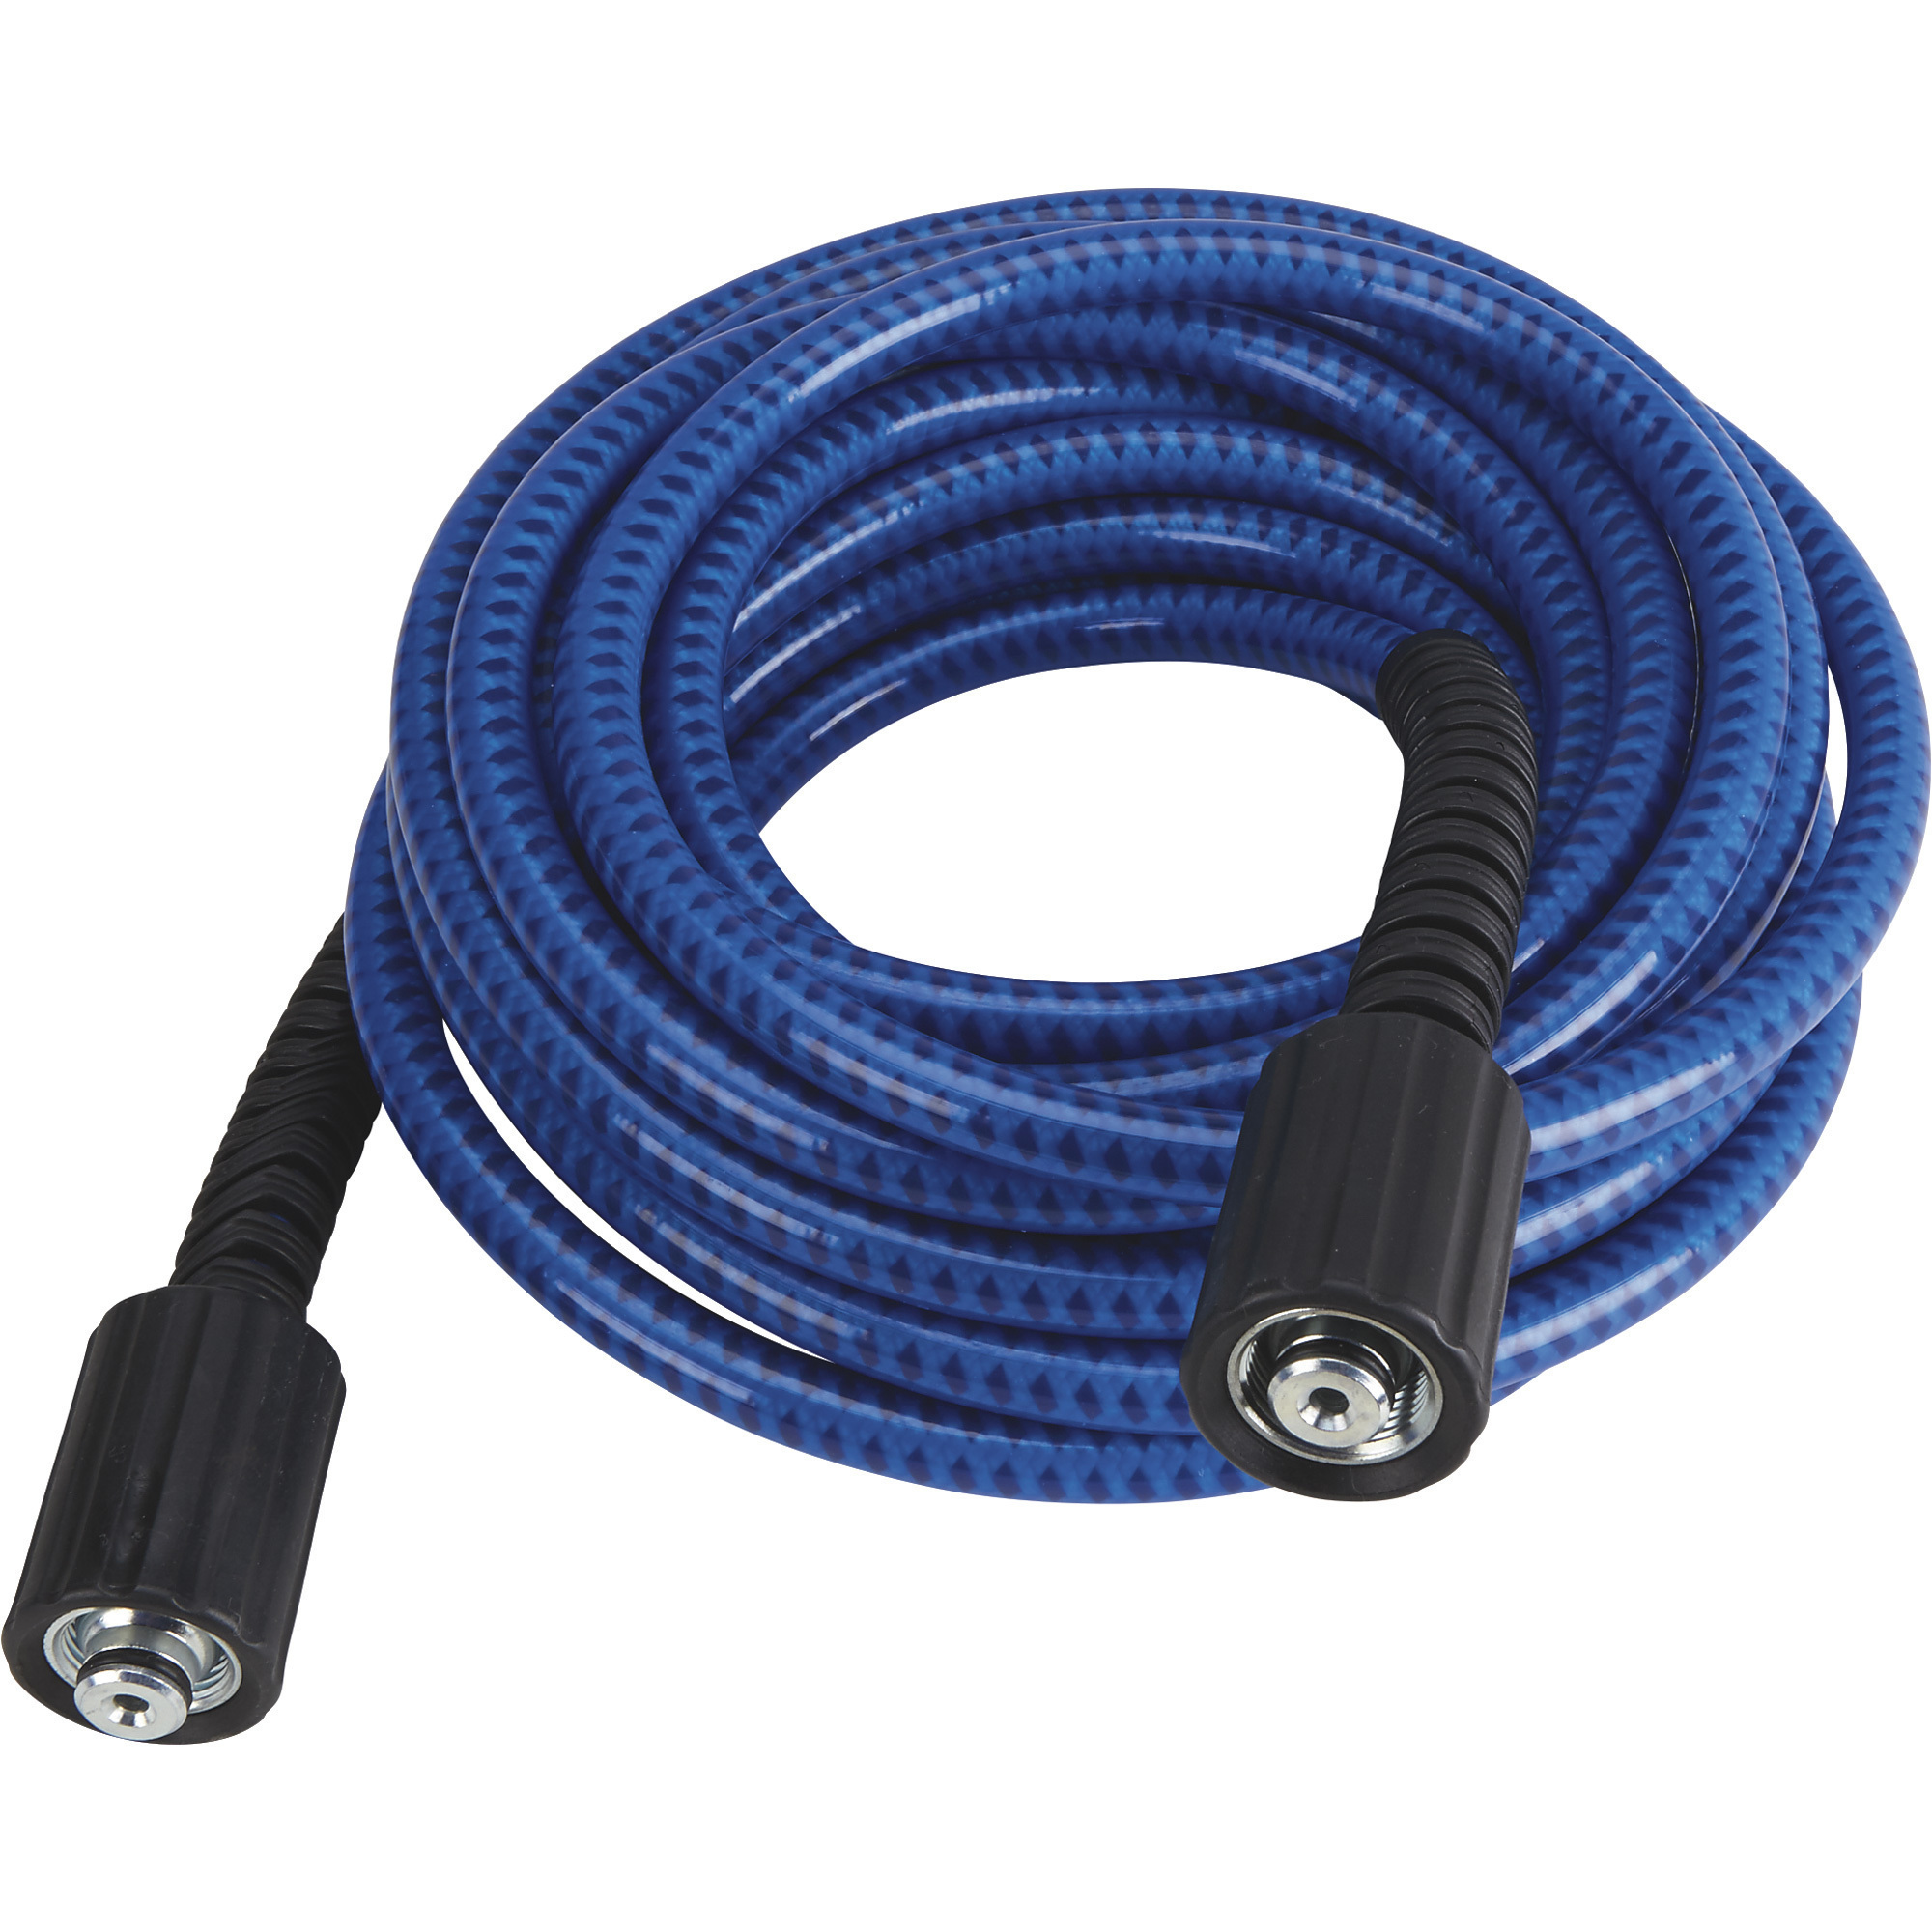 Powerhorse Nonmarking Pressure Washer Hose, 3200 PSI, 25ft. x 1/4Inch, Model 646200513